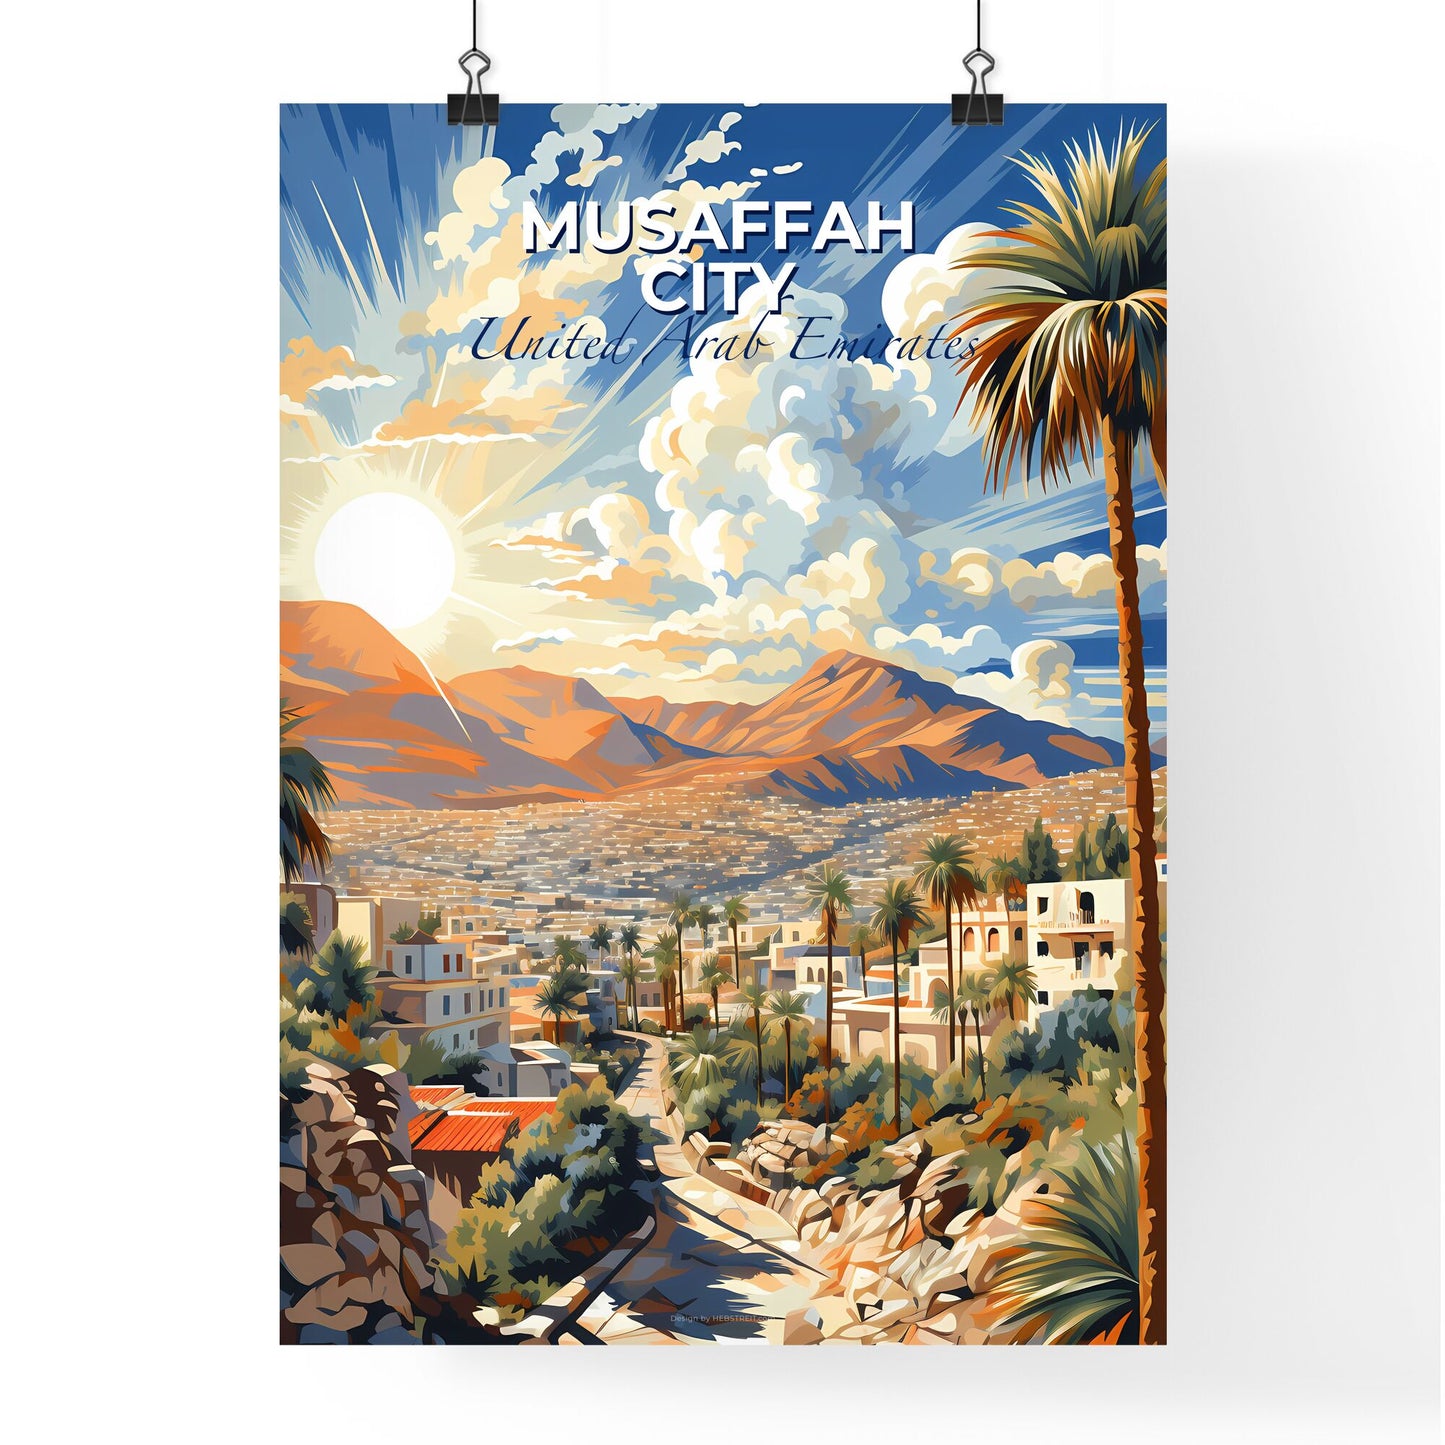 Musaffah City United Arab Emirates Colorful Cityscape Painting with Palm Trees and Mountains Default Title